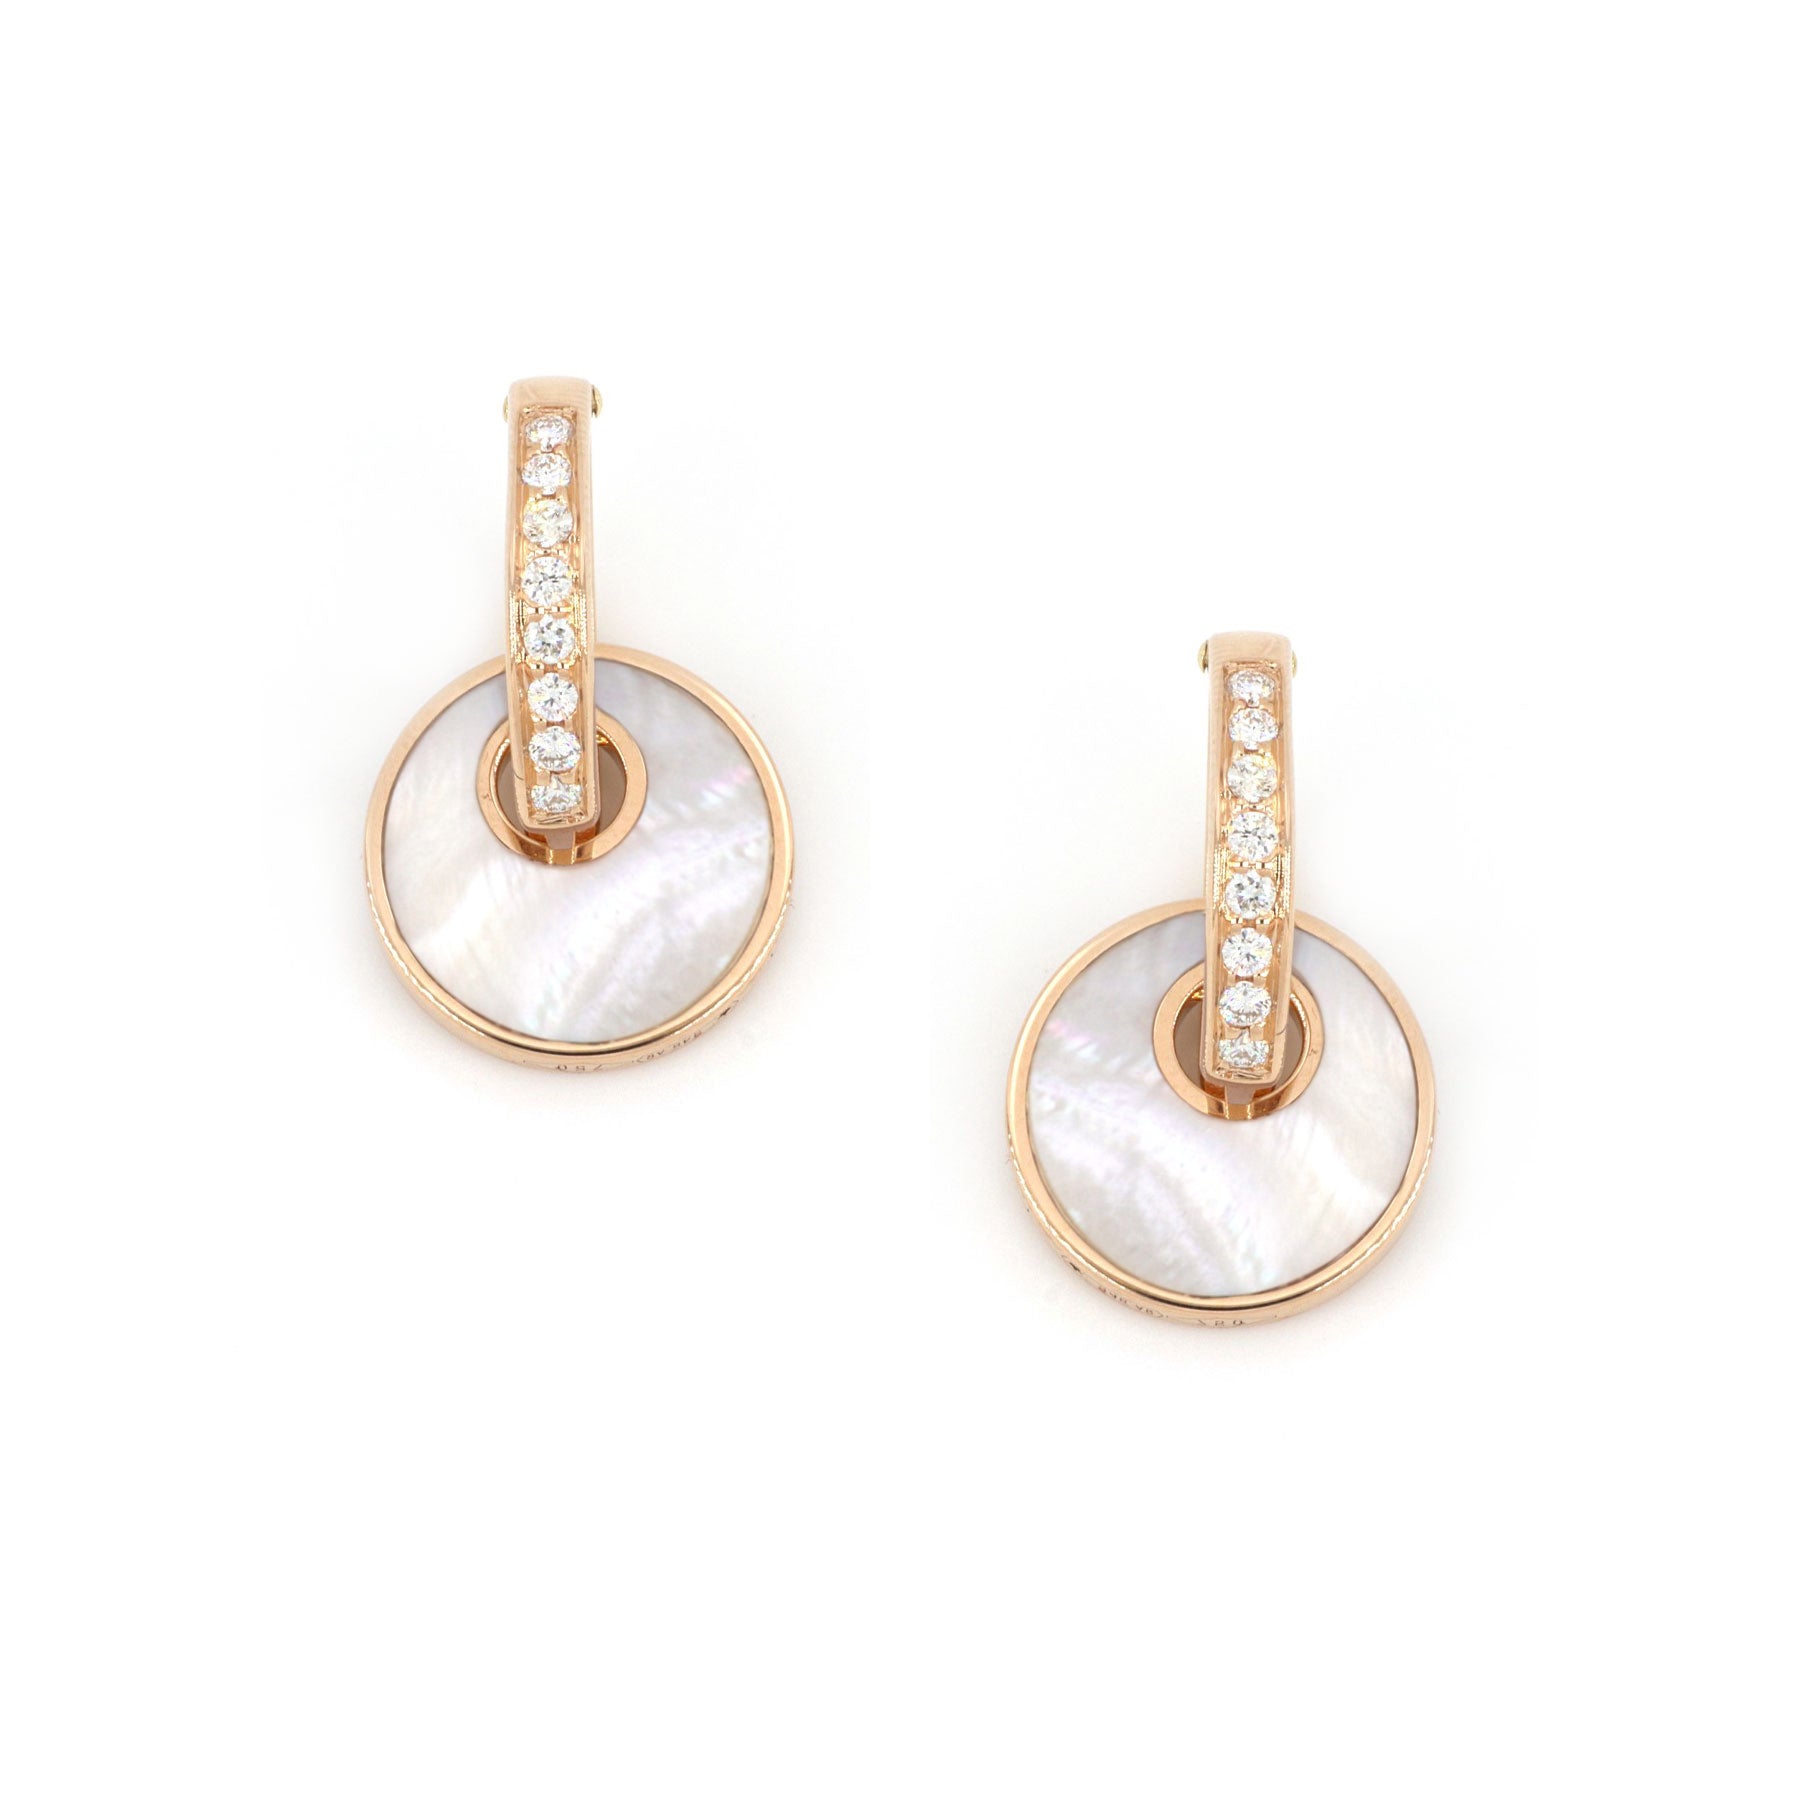 Giove Earrings Natural Stones And Diamonds